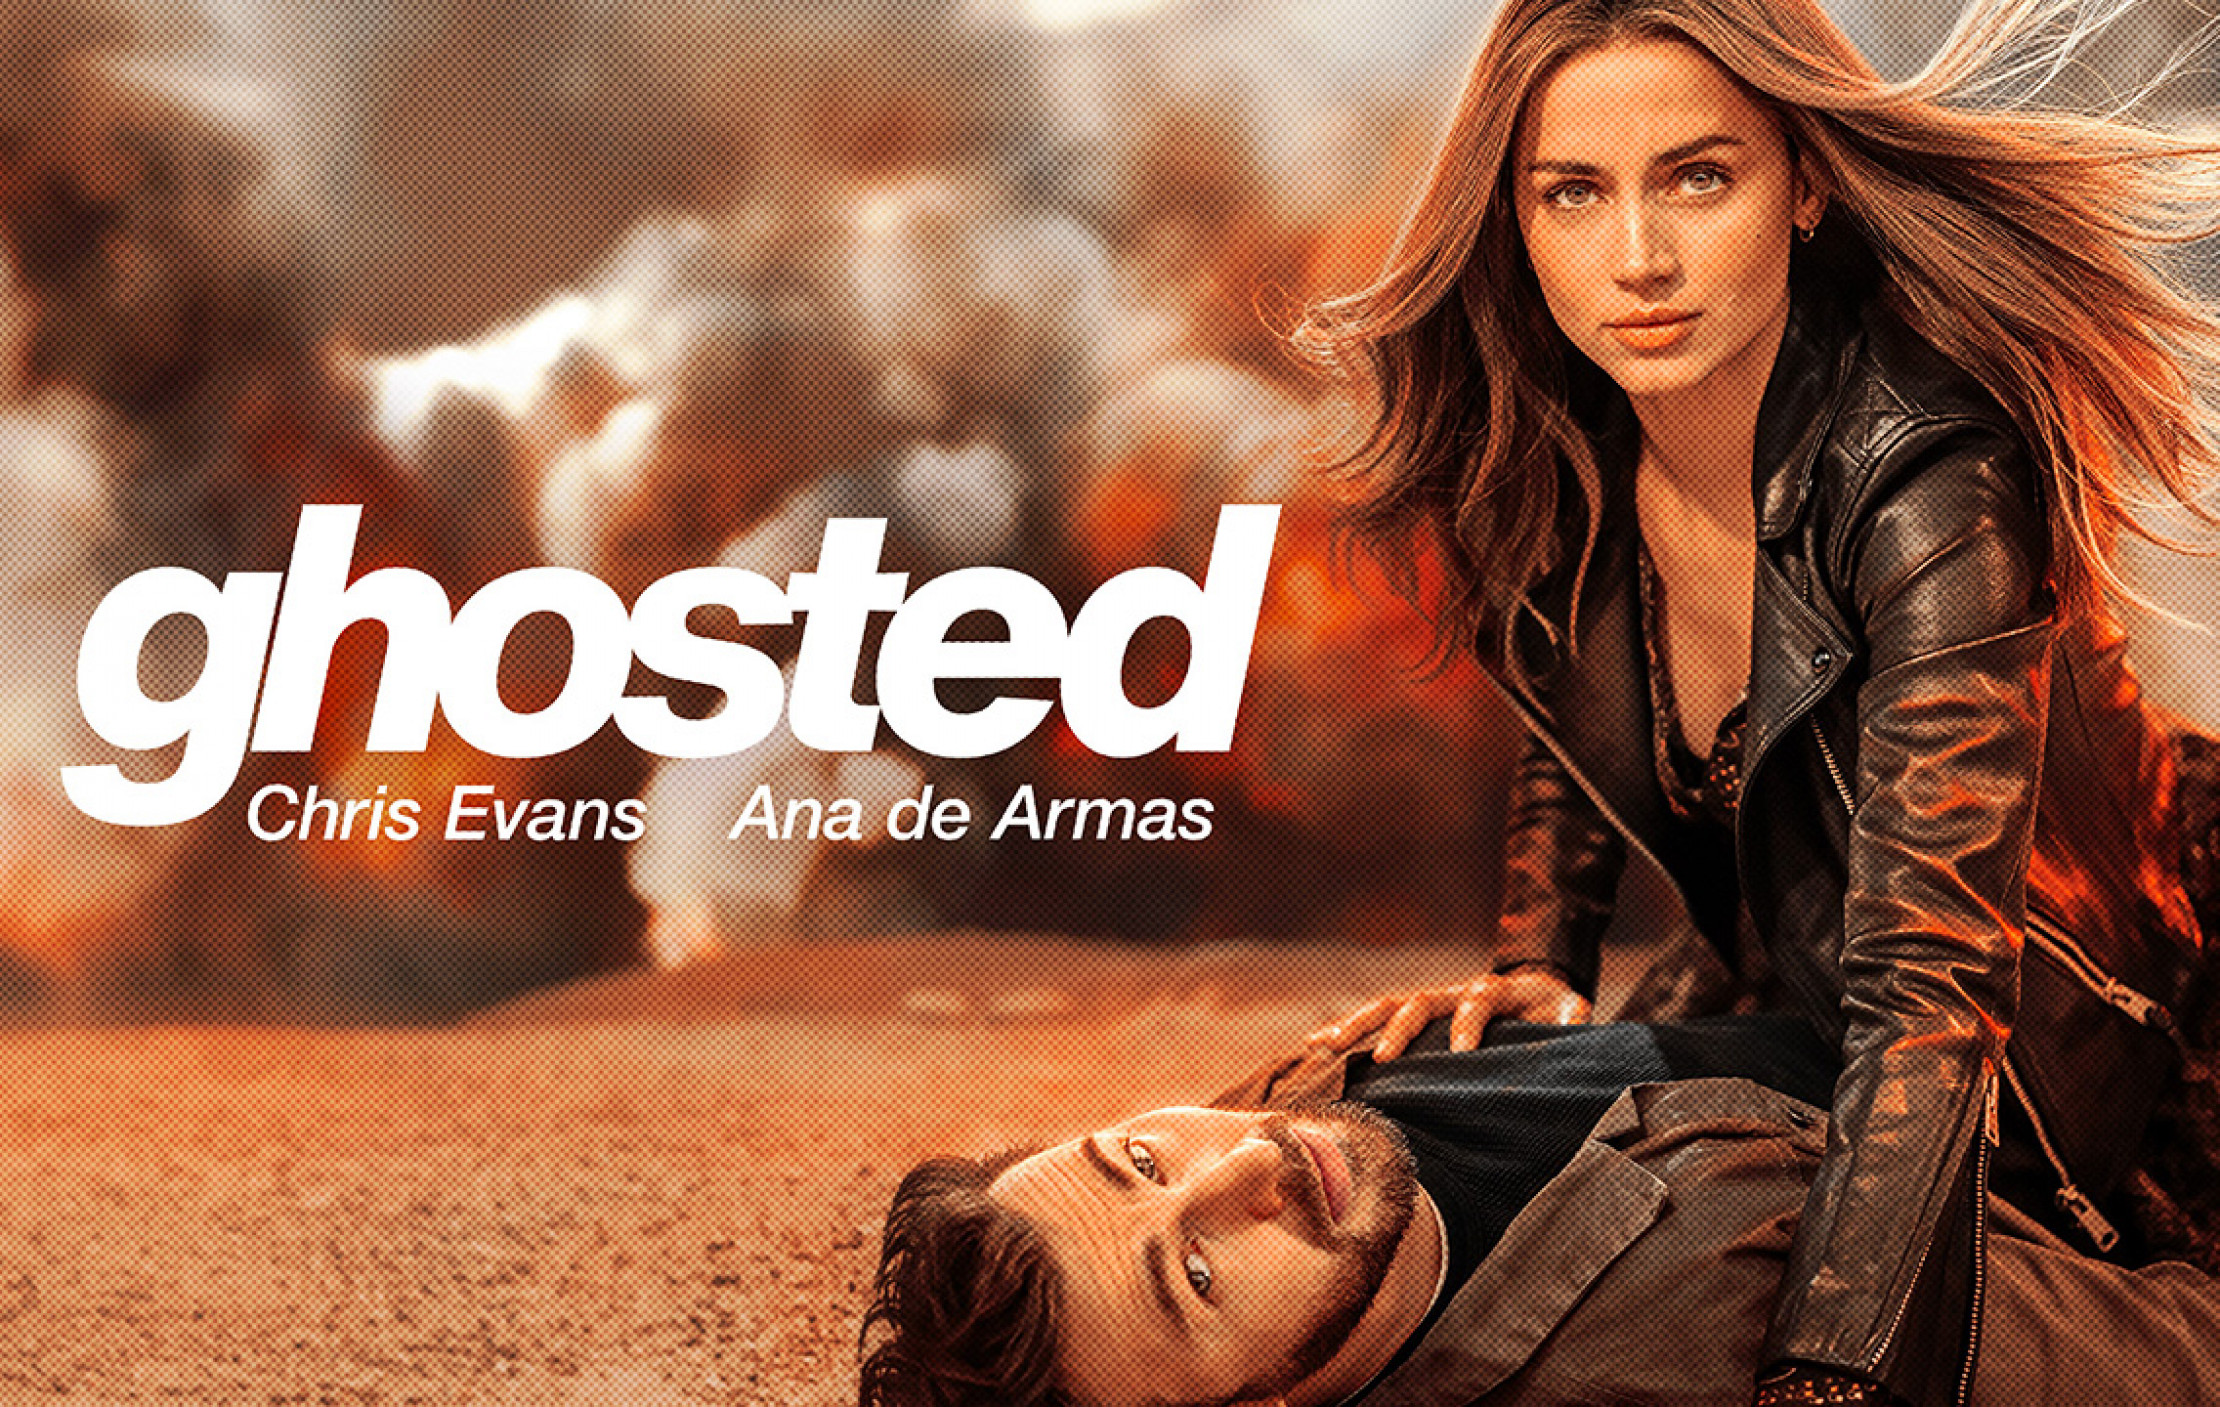 Ghosted Box Office Hit